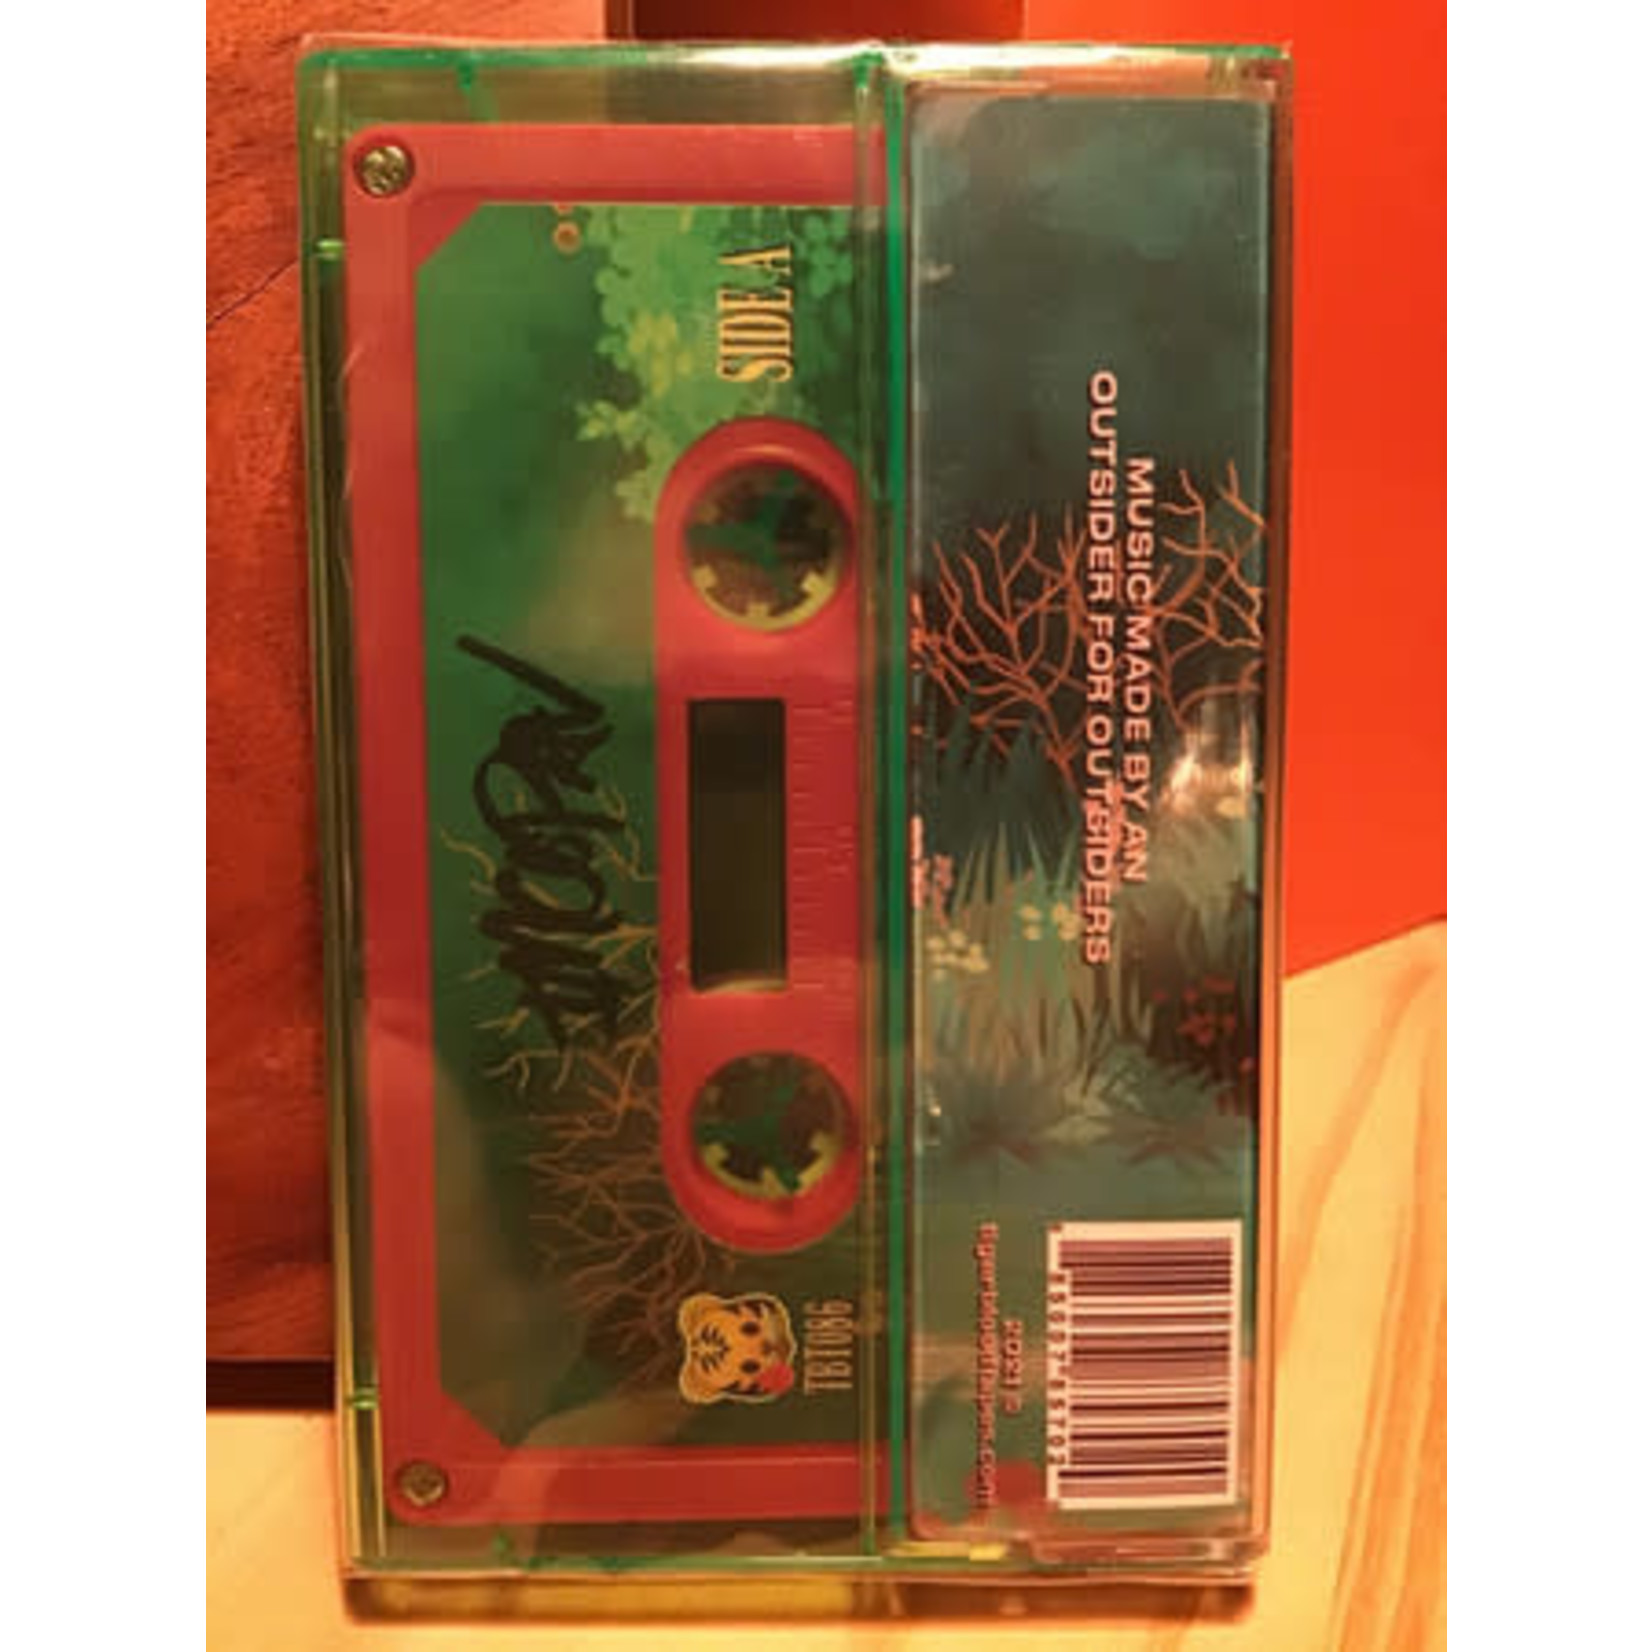 ImCoPav - Bedroom Music For The Painfully Alone (Tape) [Red]